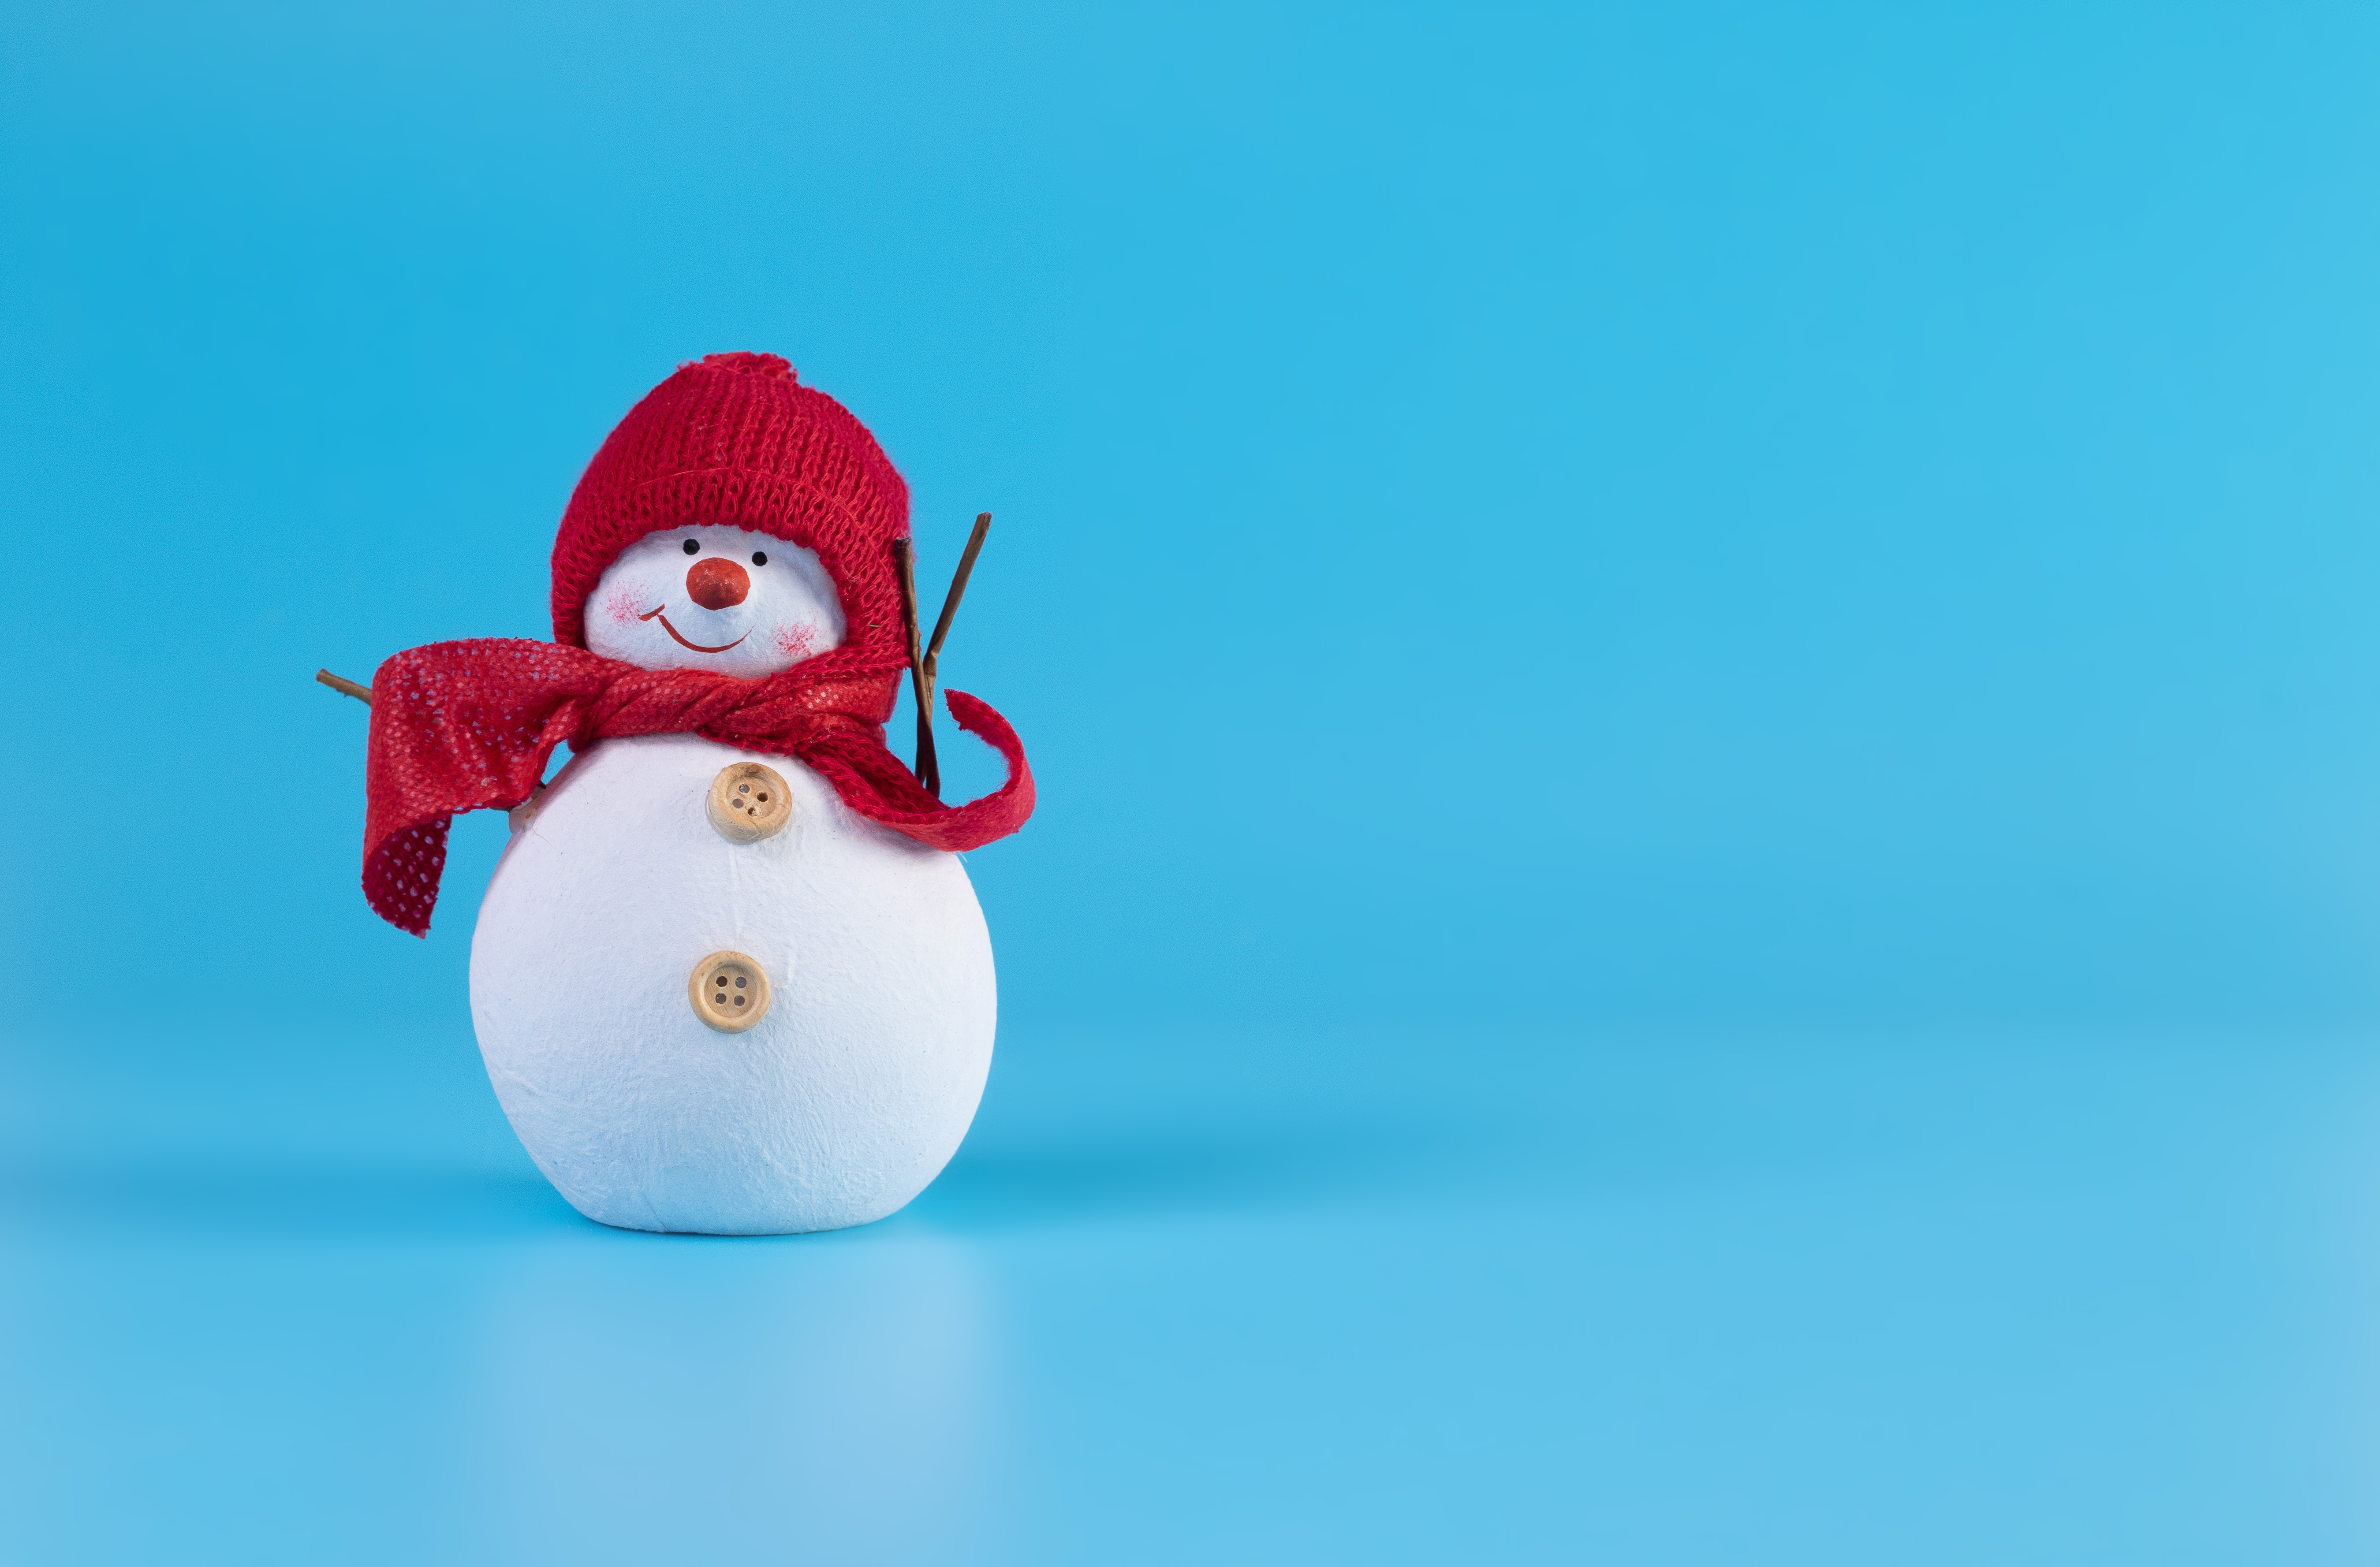 Wallpapers red scarf snowman wallpaper new year 2023 on the desktop